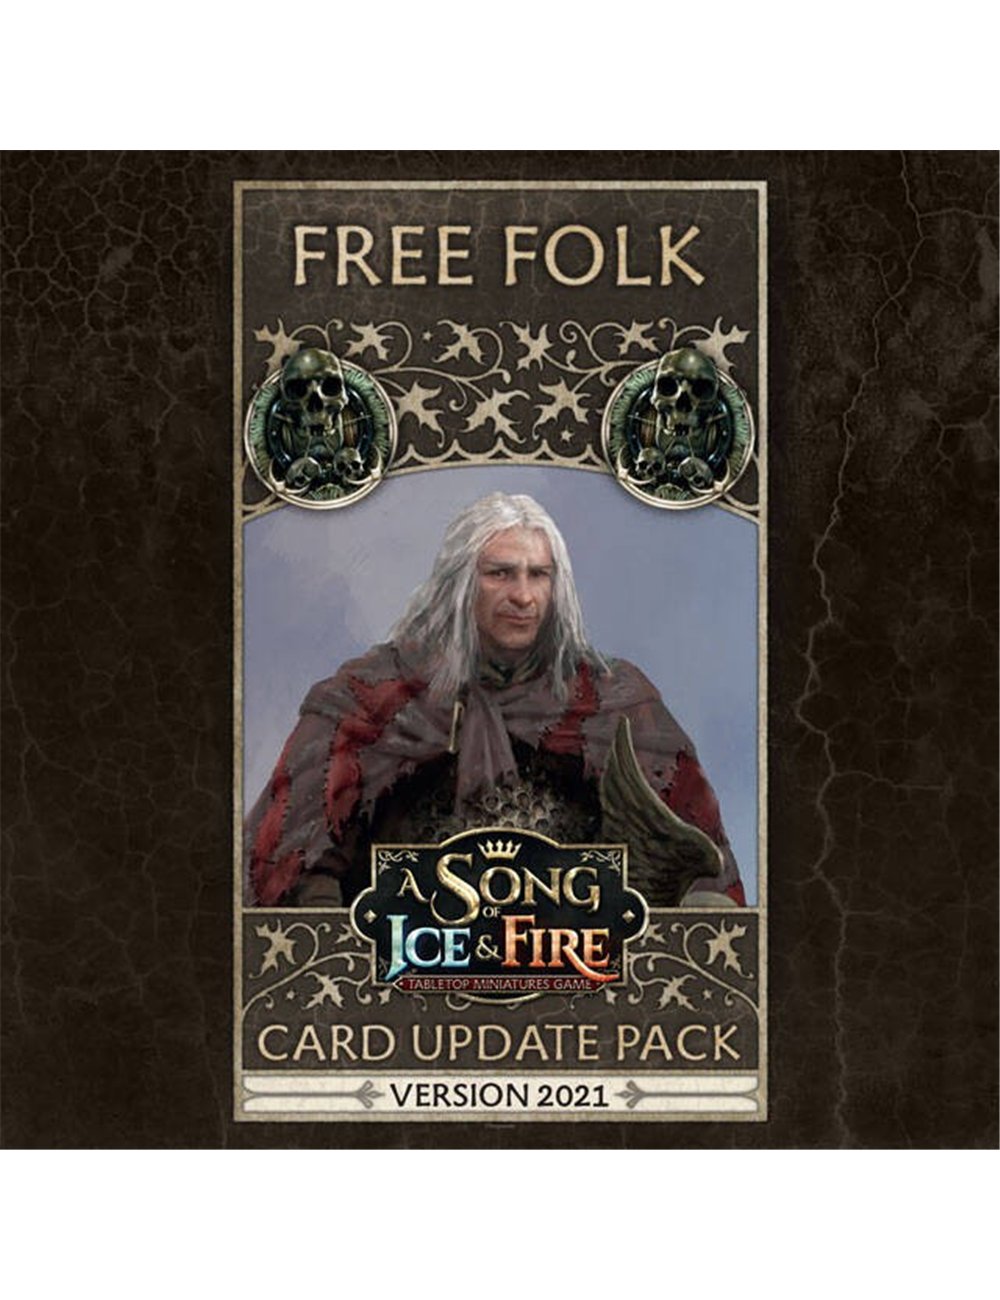 A SONG OF ICE & FIRE - Free Folk Faction Pack